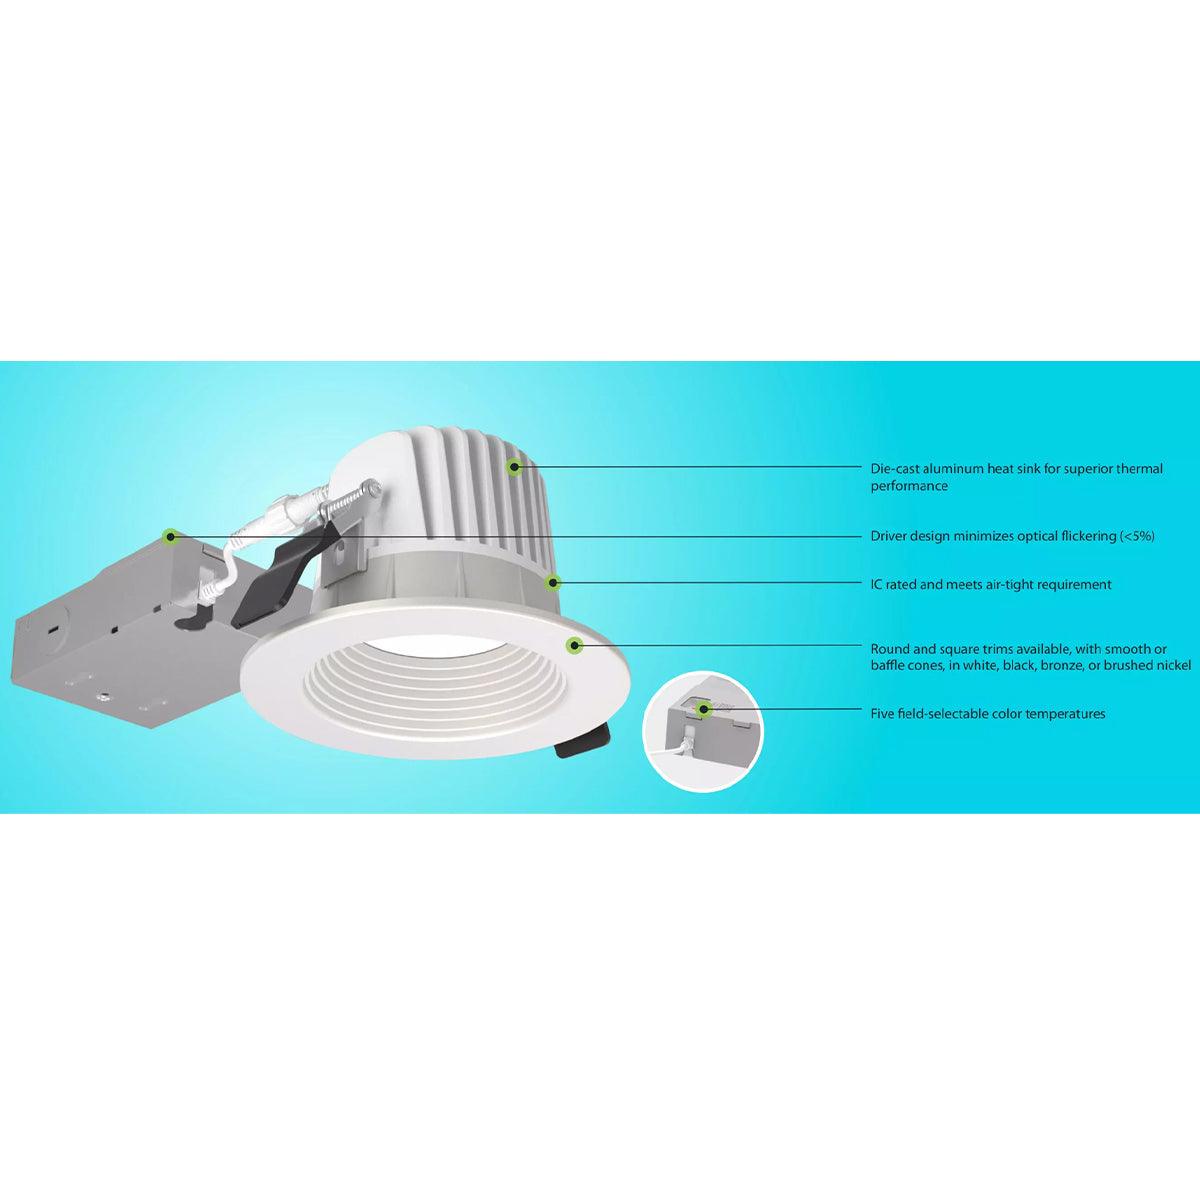 4 Inch HALED Canless LED Recessed Downlight, 12 Watt, 1050 Lumens, Selectable CCT, 2700K to 5000K, 120V